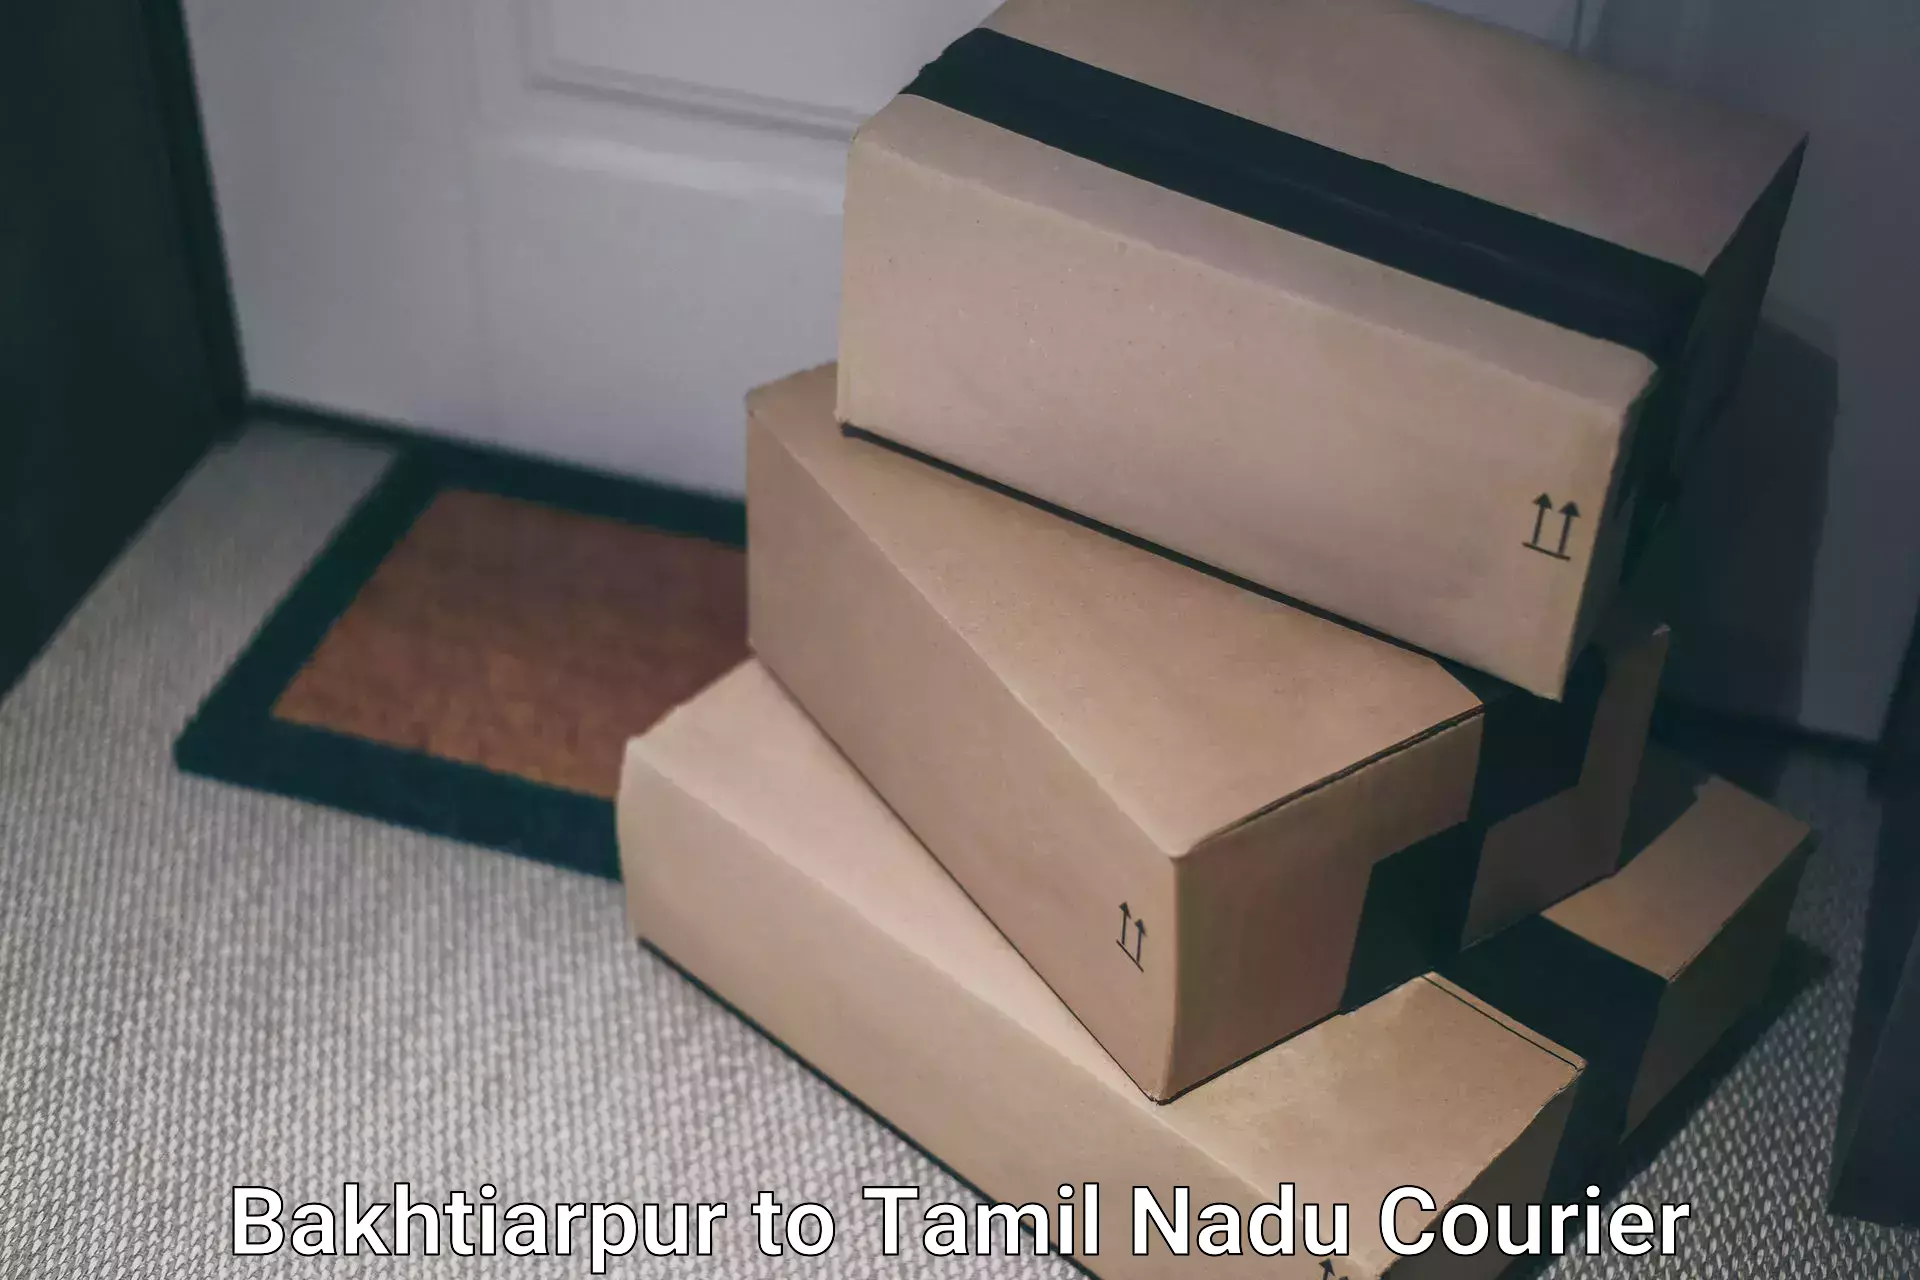 Round-the-clock parcel delivery in Bakhtiarpur to Tamil Nadu